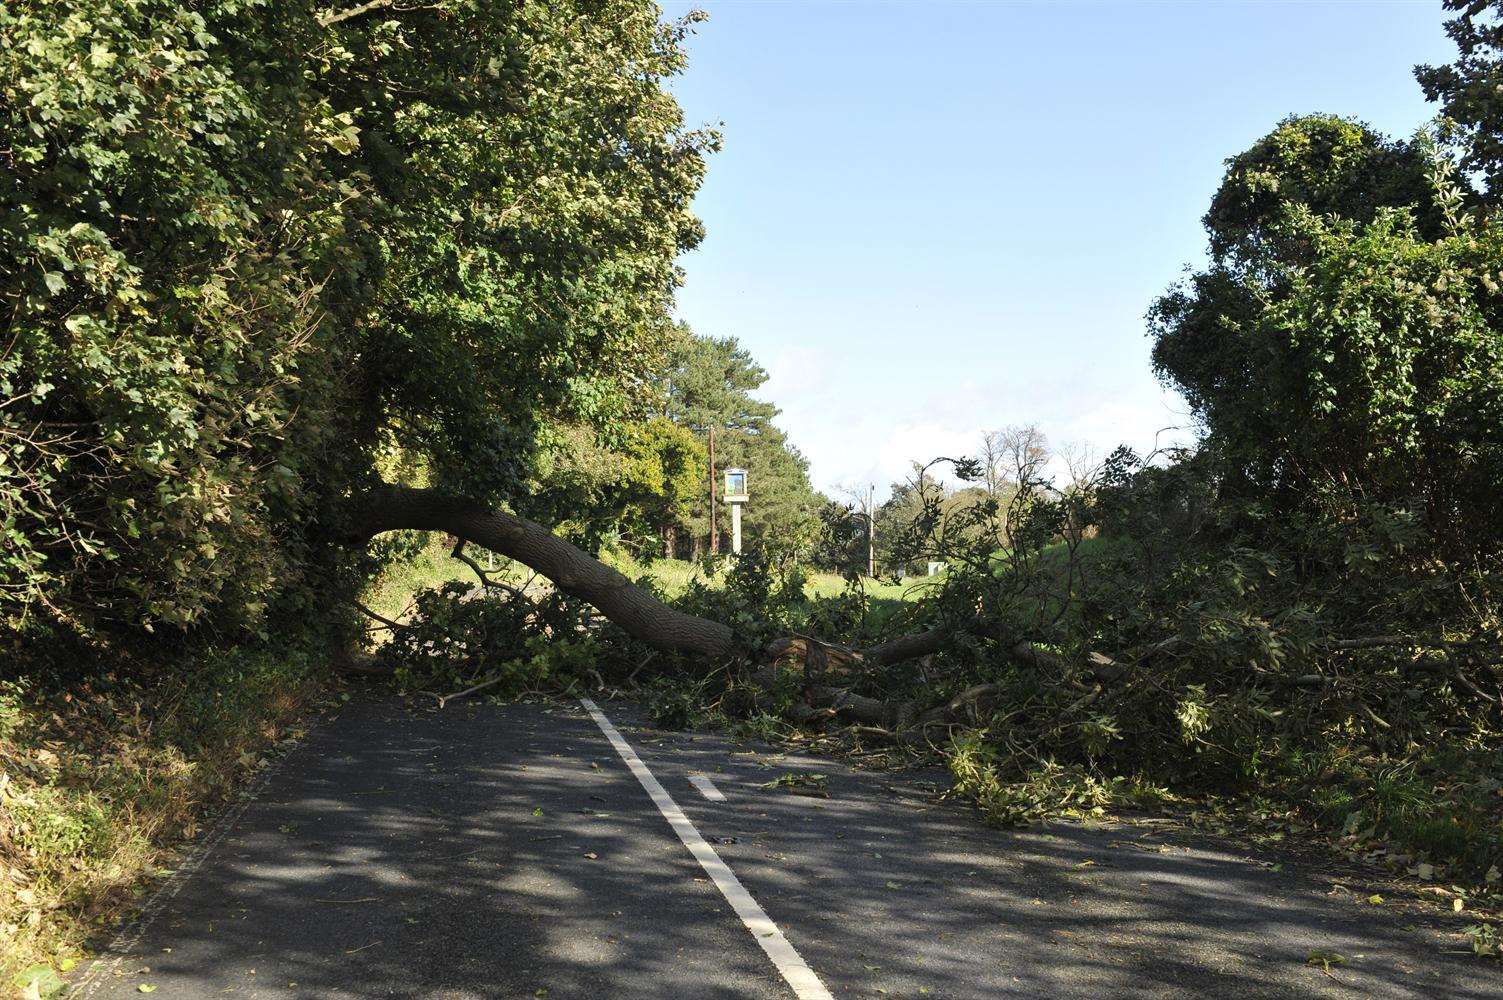 Several roads are blocked by fallen trees. Stock image.